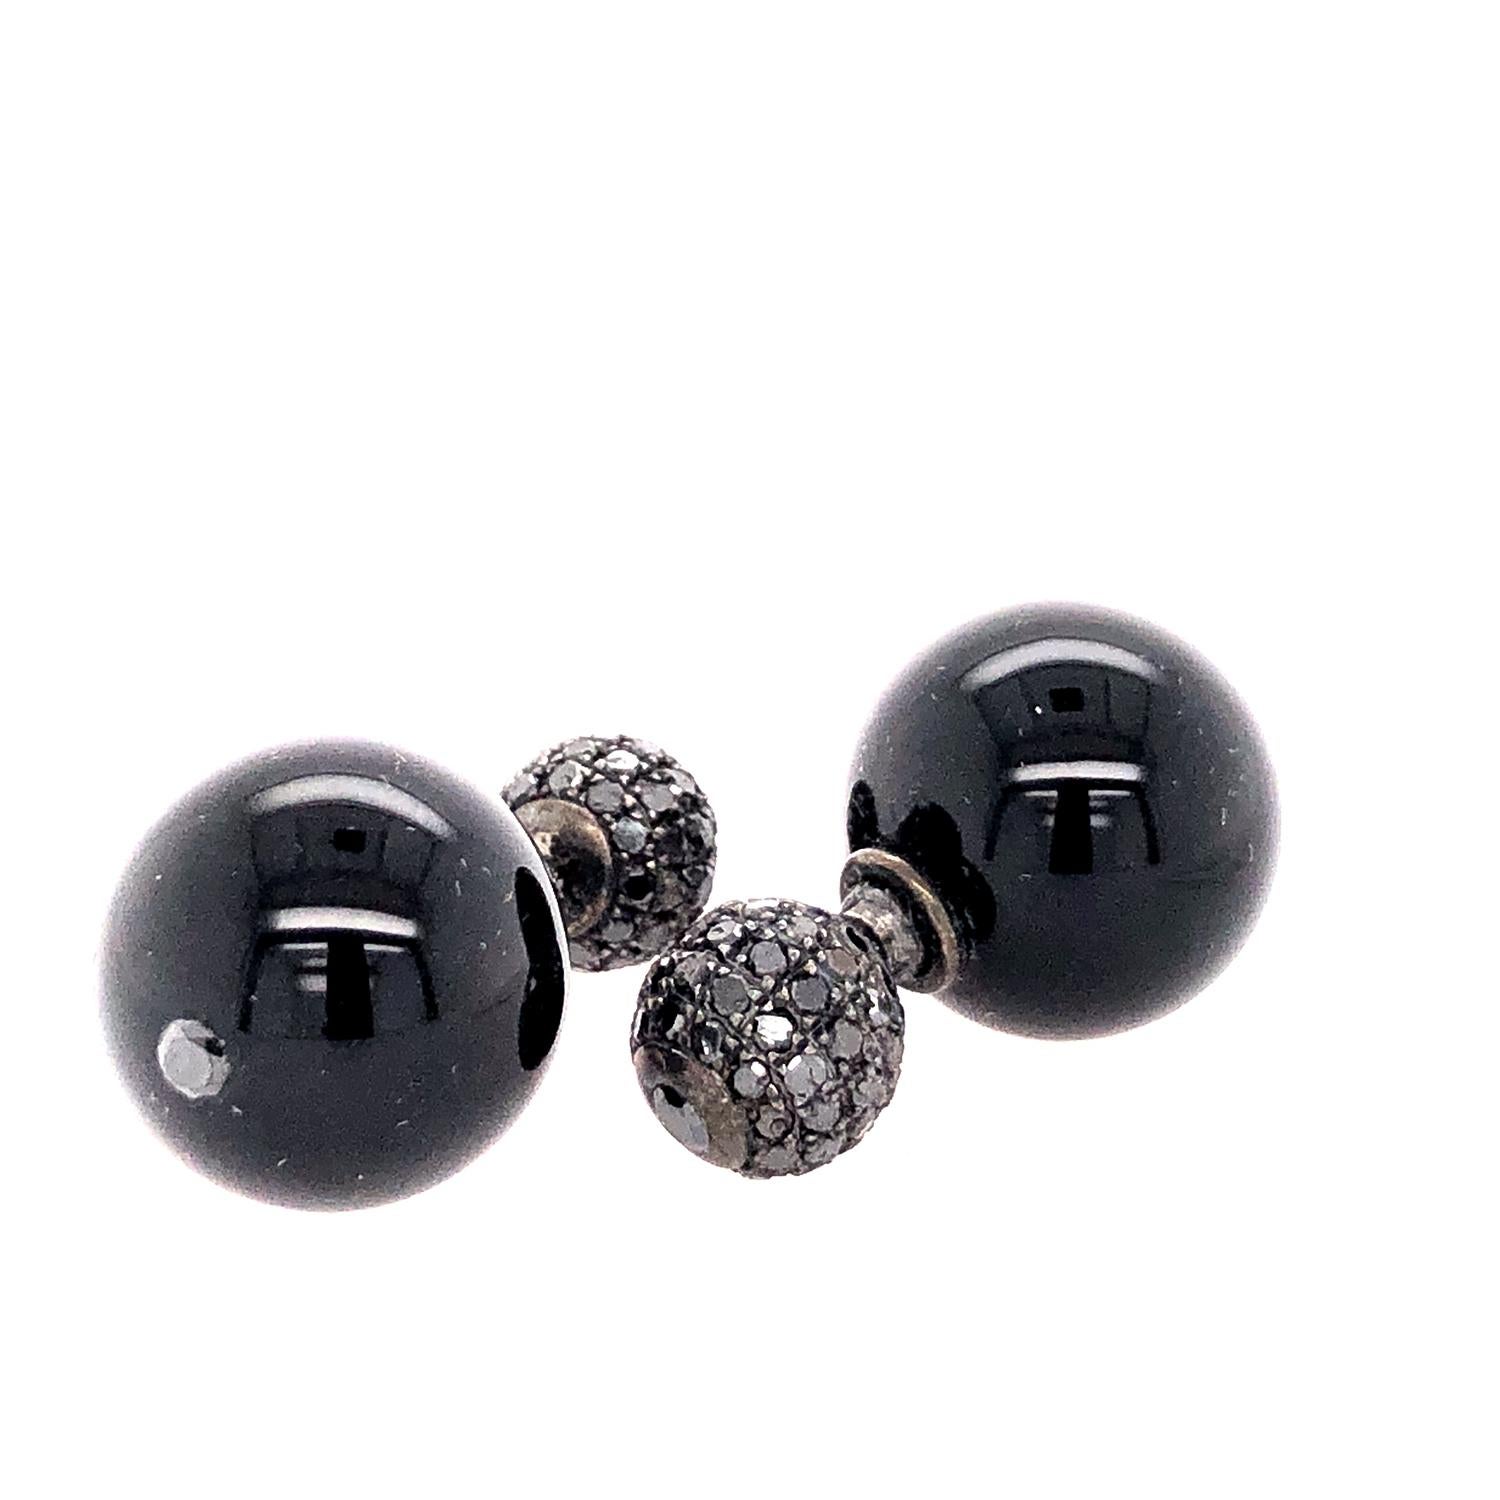 Artisan Black Onyx & Pave Diamond Ball Tunnel Earrings Made In 14k Gold & Silver For Sale